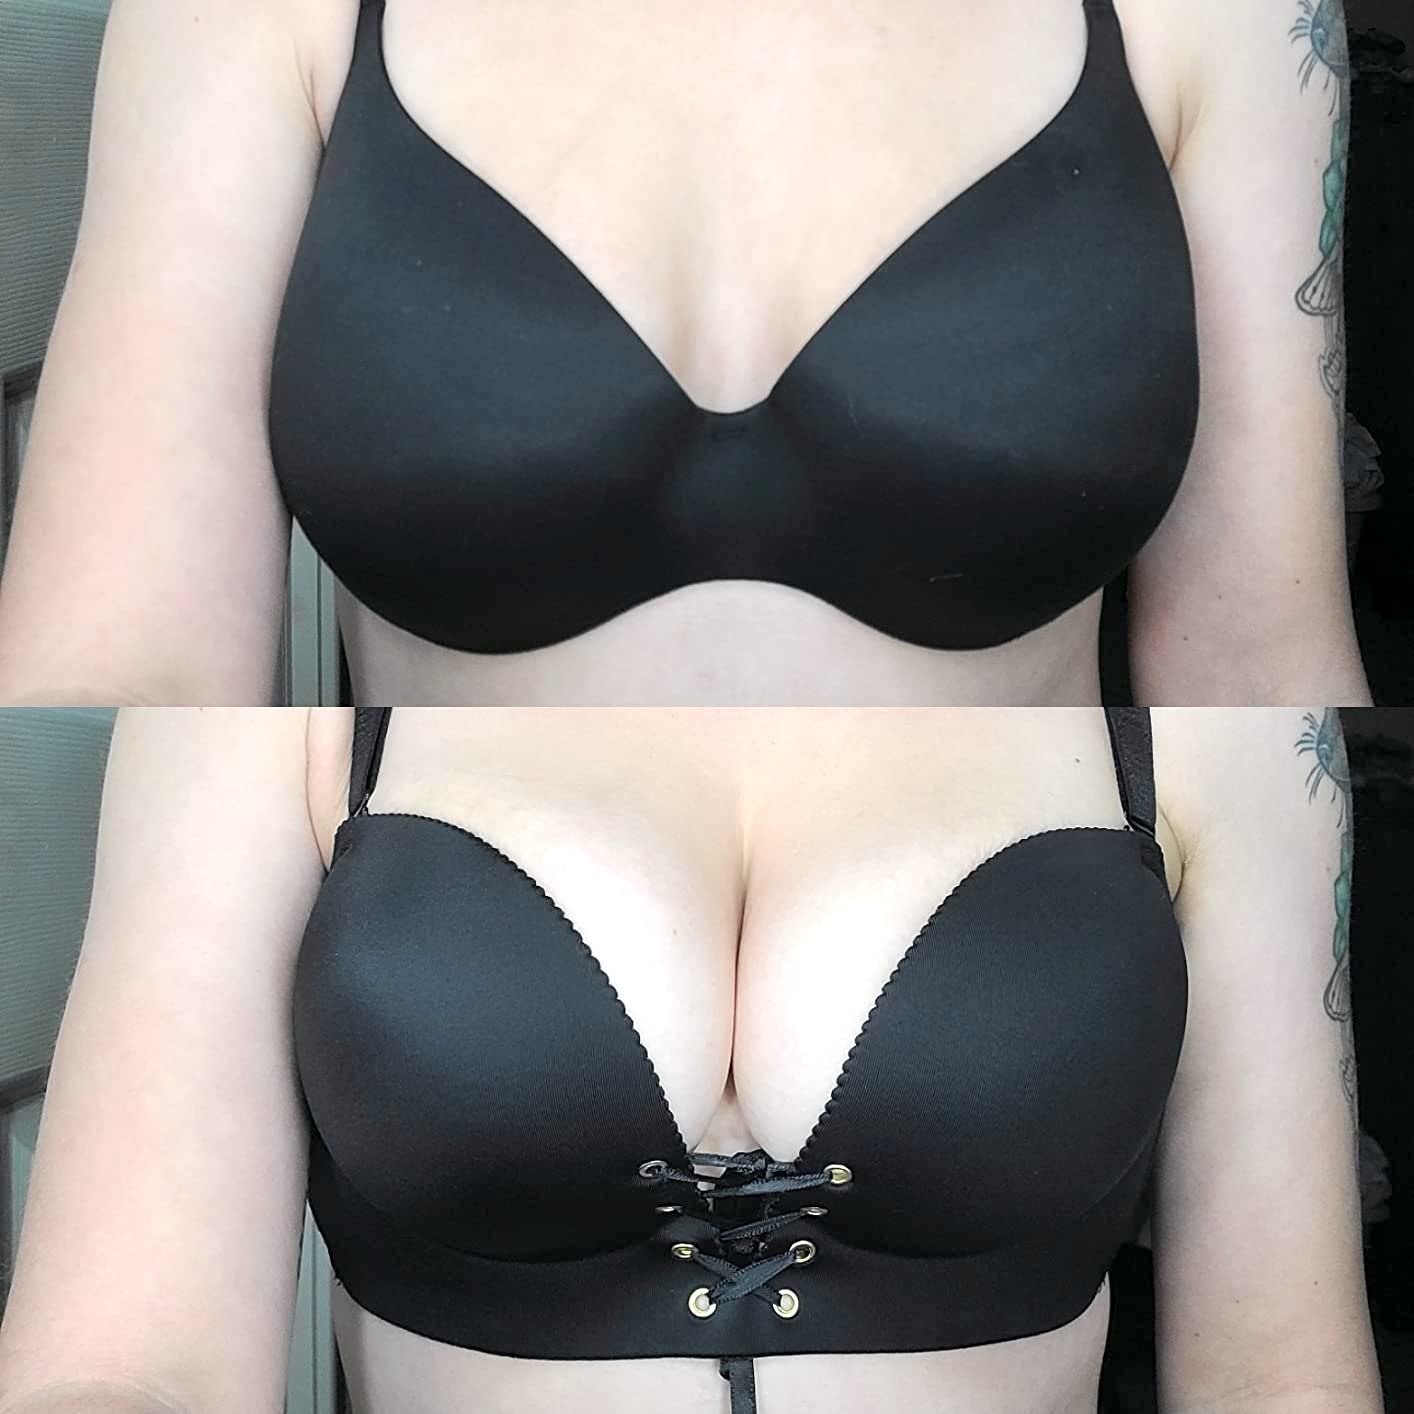 reviewer wearing two bras: one regular bra, and then this bra with the lacing so their breasts are pushed up